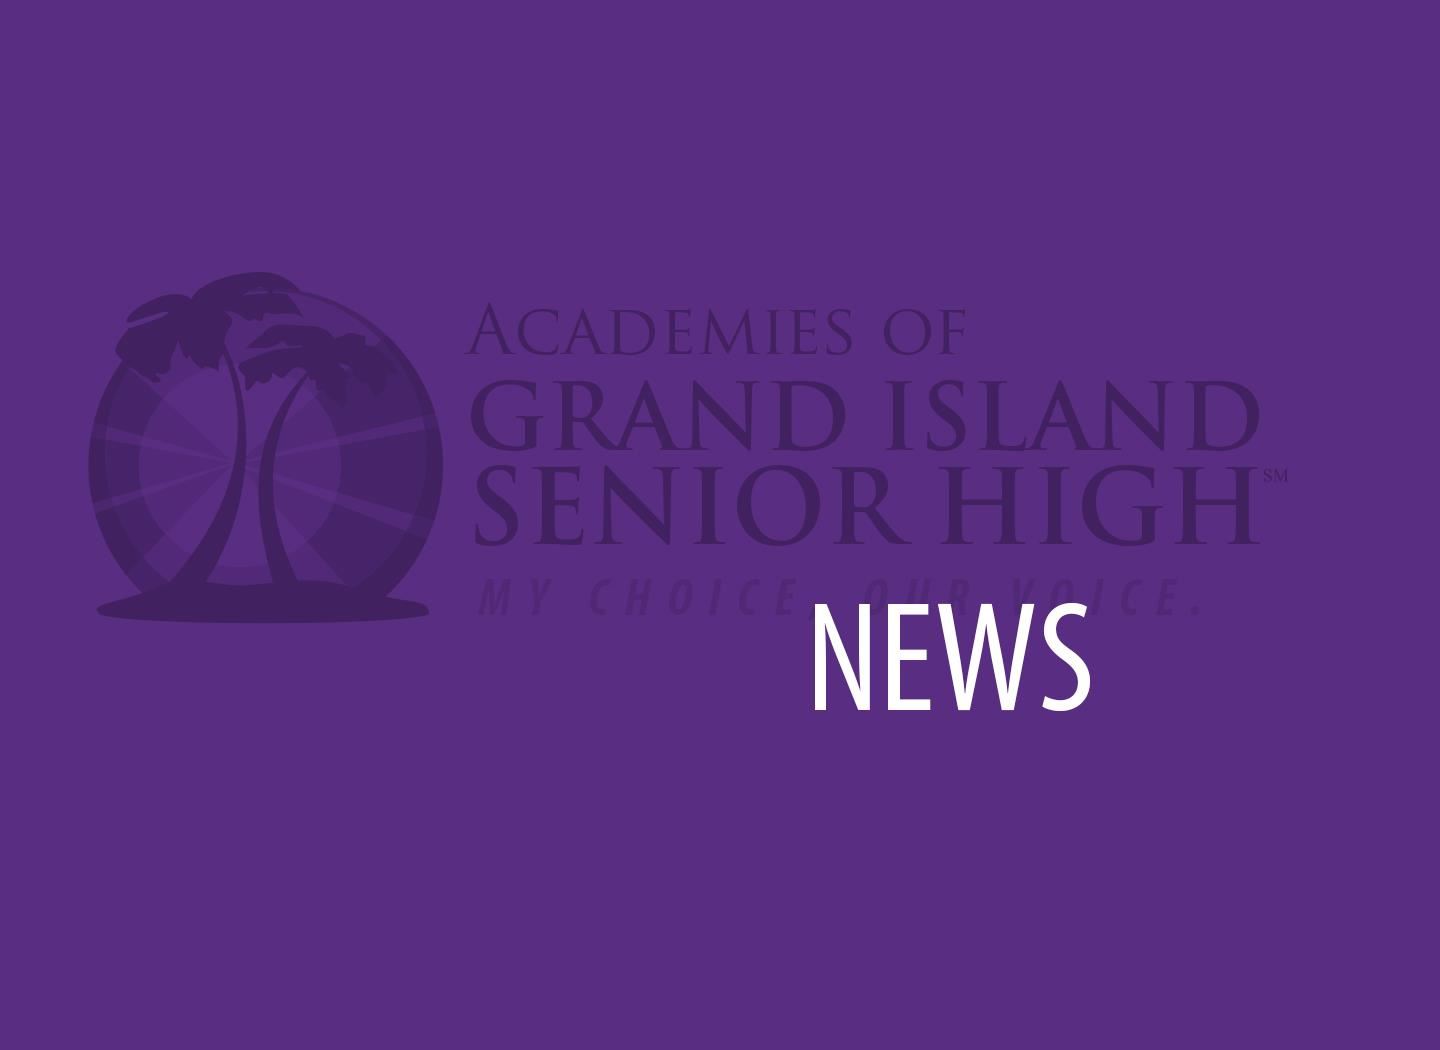 Academies of Grand Island Senior High logo and "News" icon over a purple background